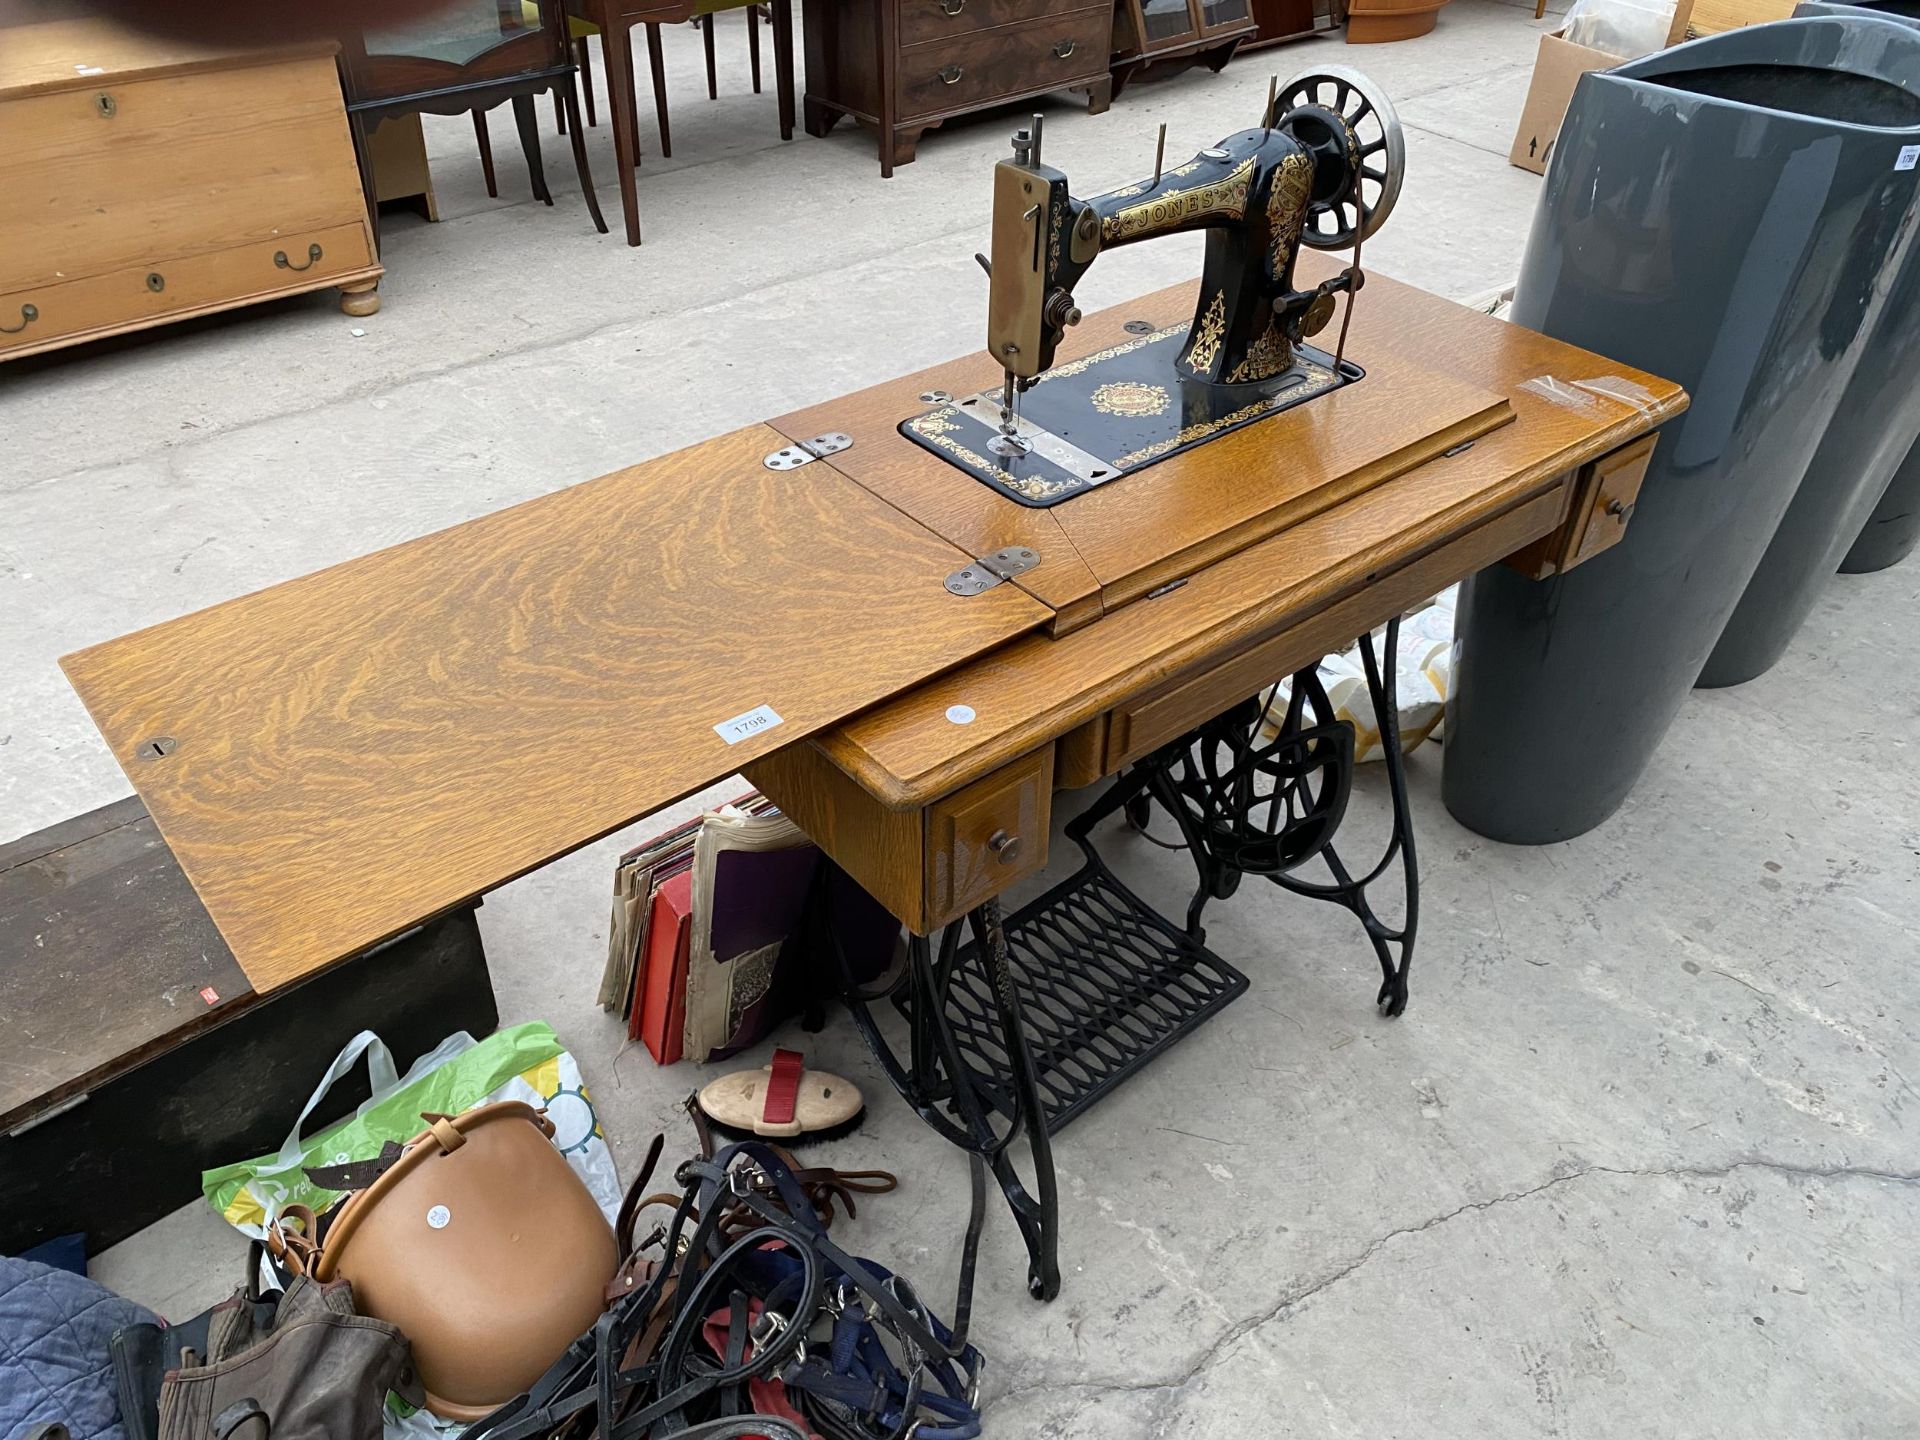 A JONES TREADLE SEWING MACHINE WITH CAST IRON BASE